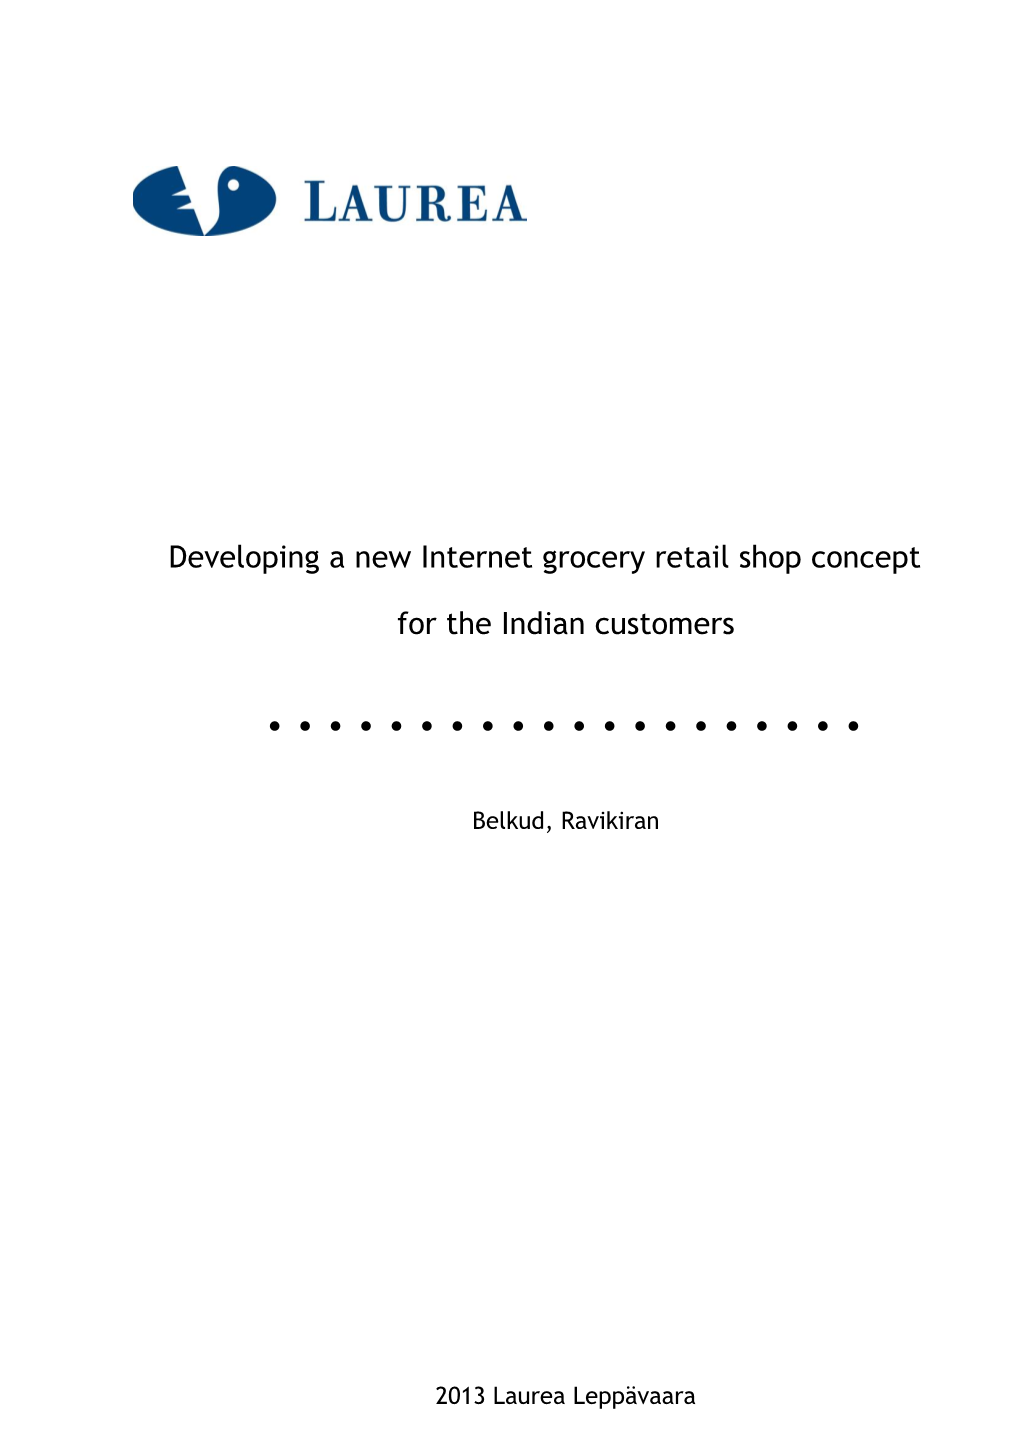 Developing a New Internet Grocery Retail Shop Concept for the Indian Customers